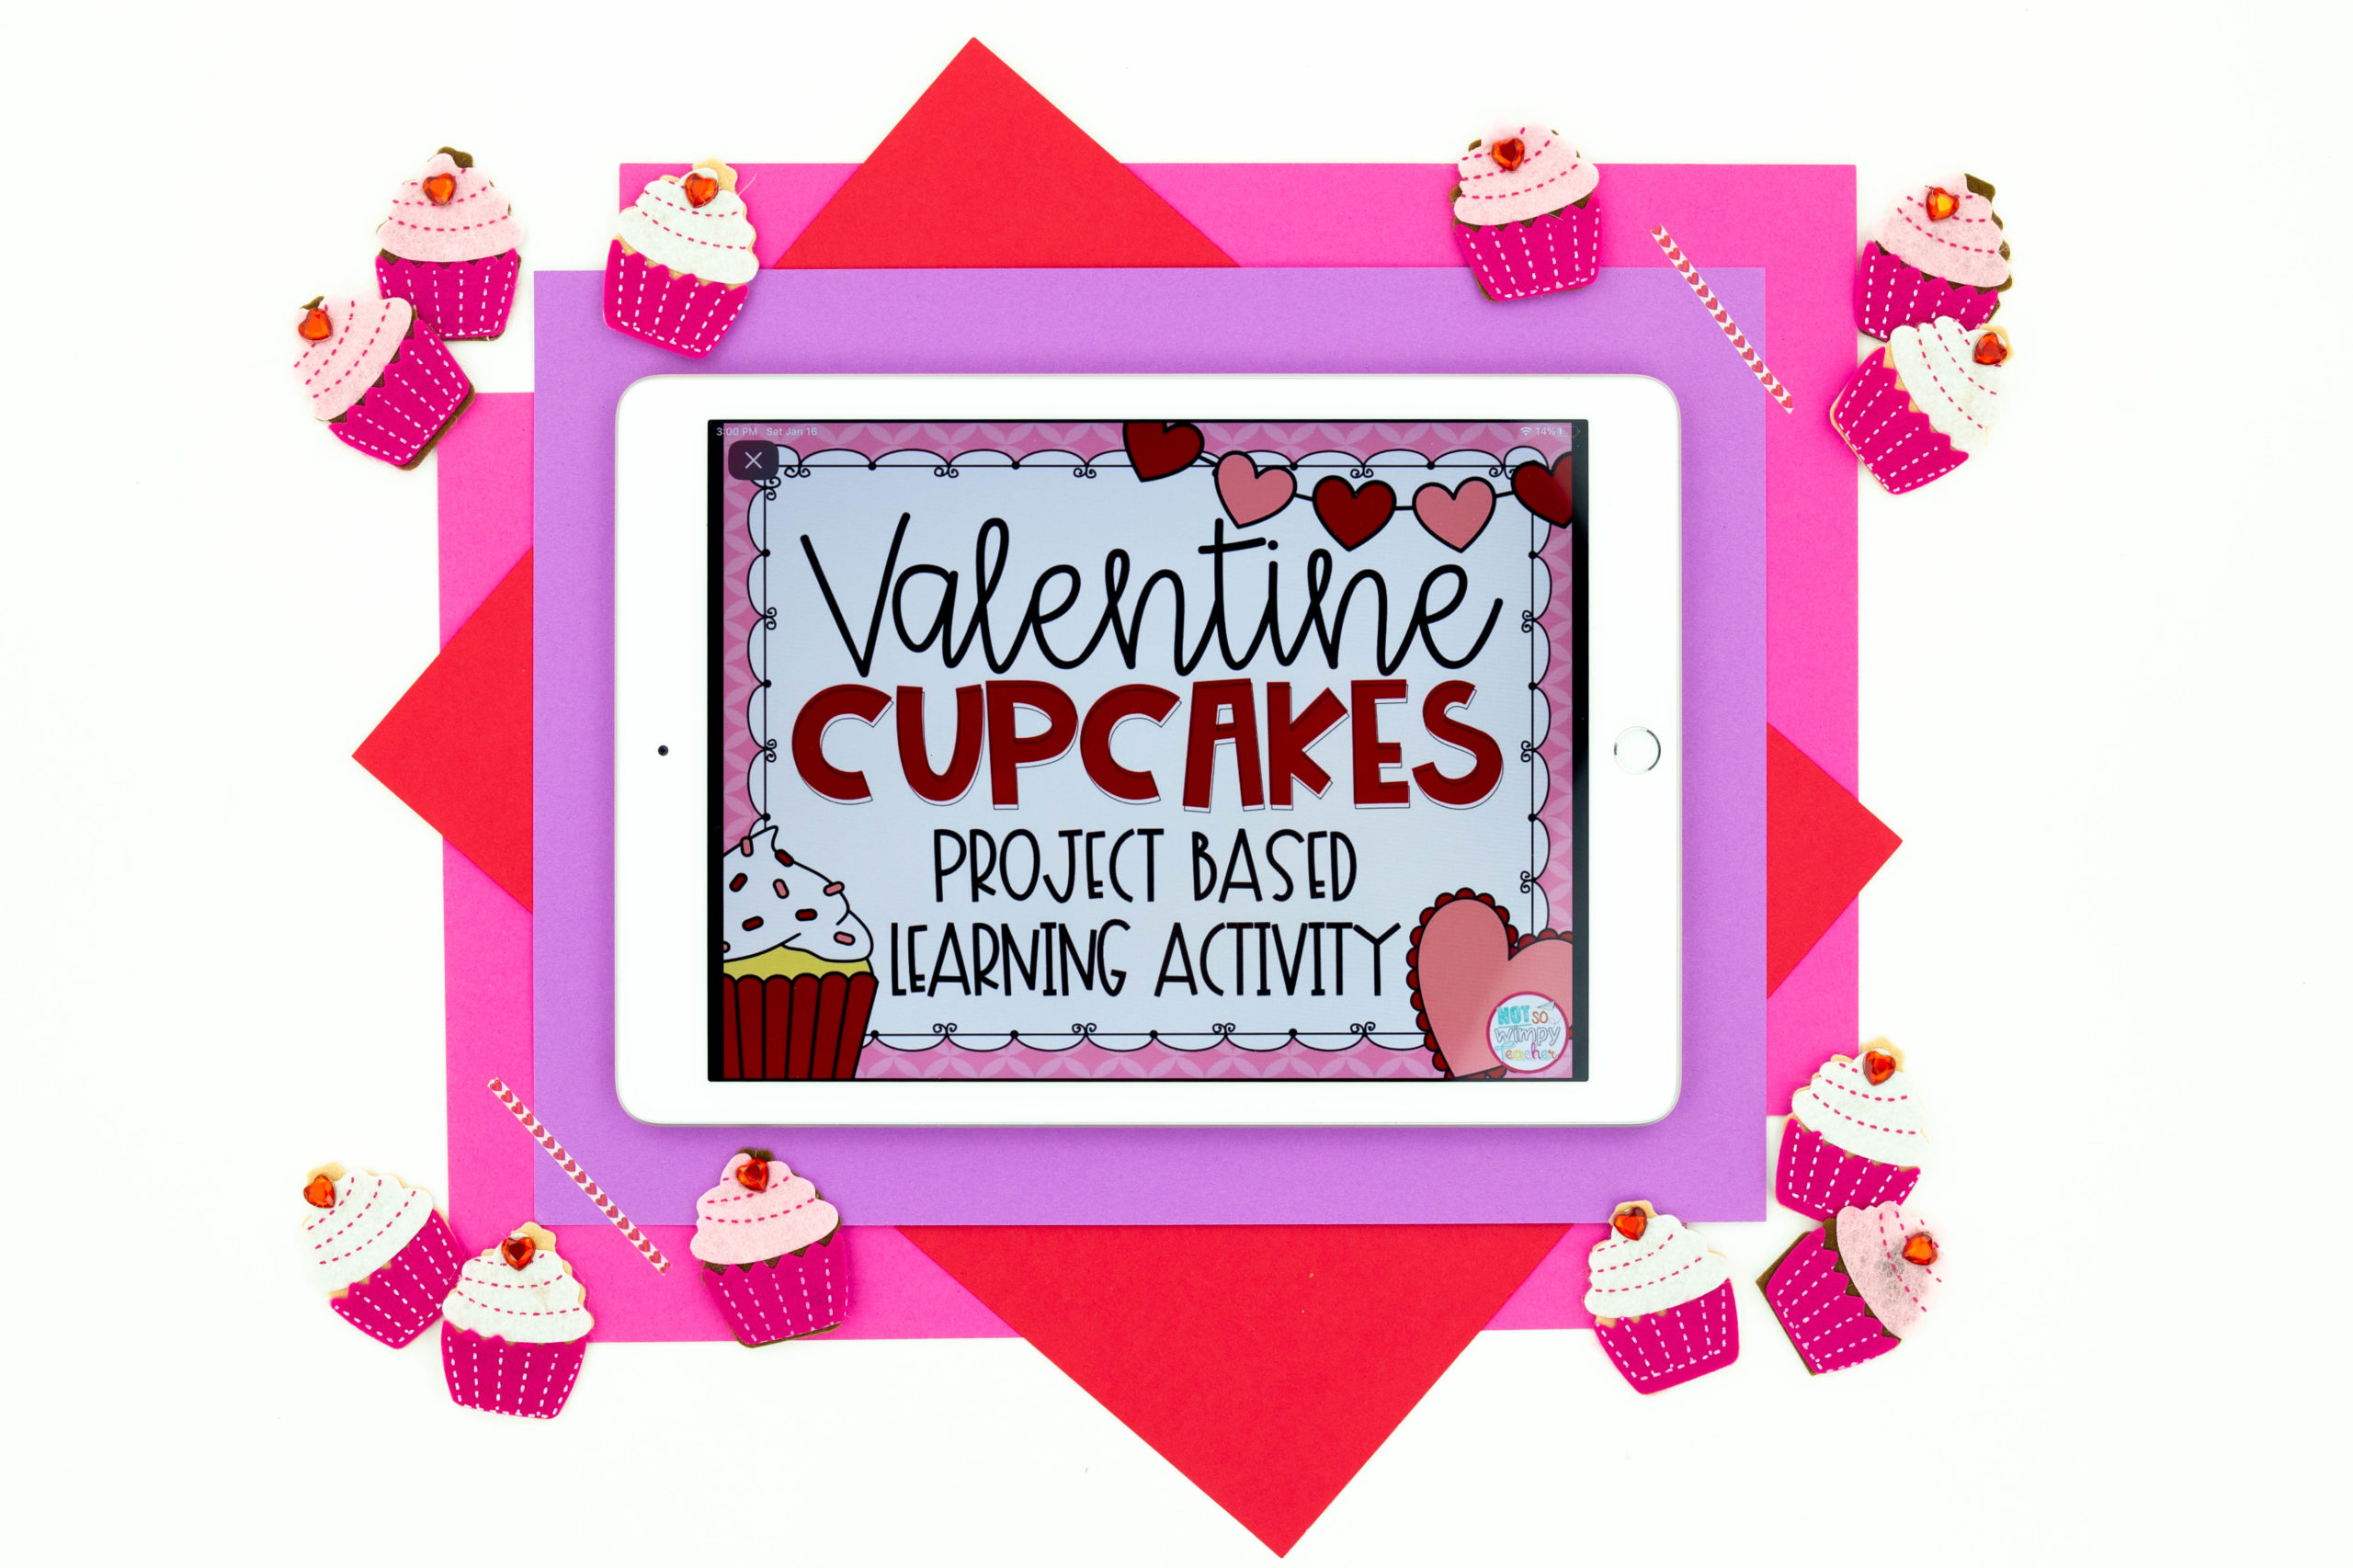 iPad image of Valentine Cupcakes Project Based Learning Activity on red and pink background surrounded by cupcakes